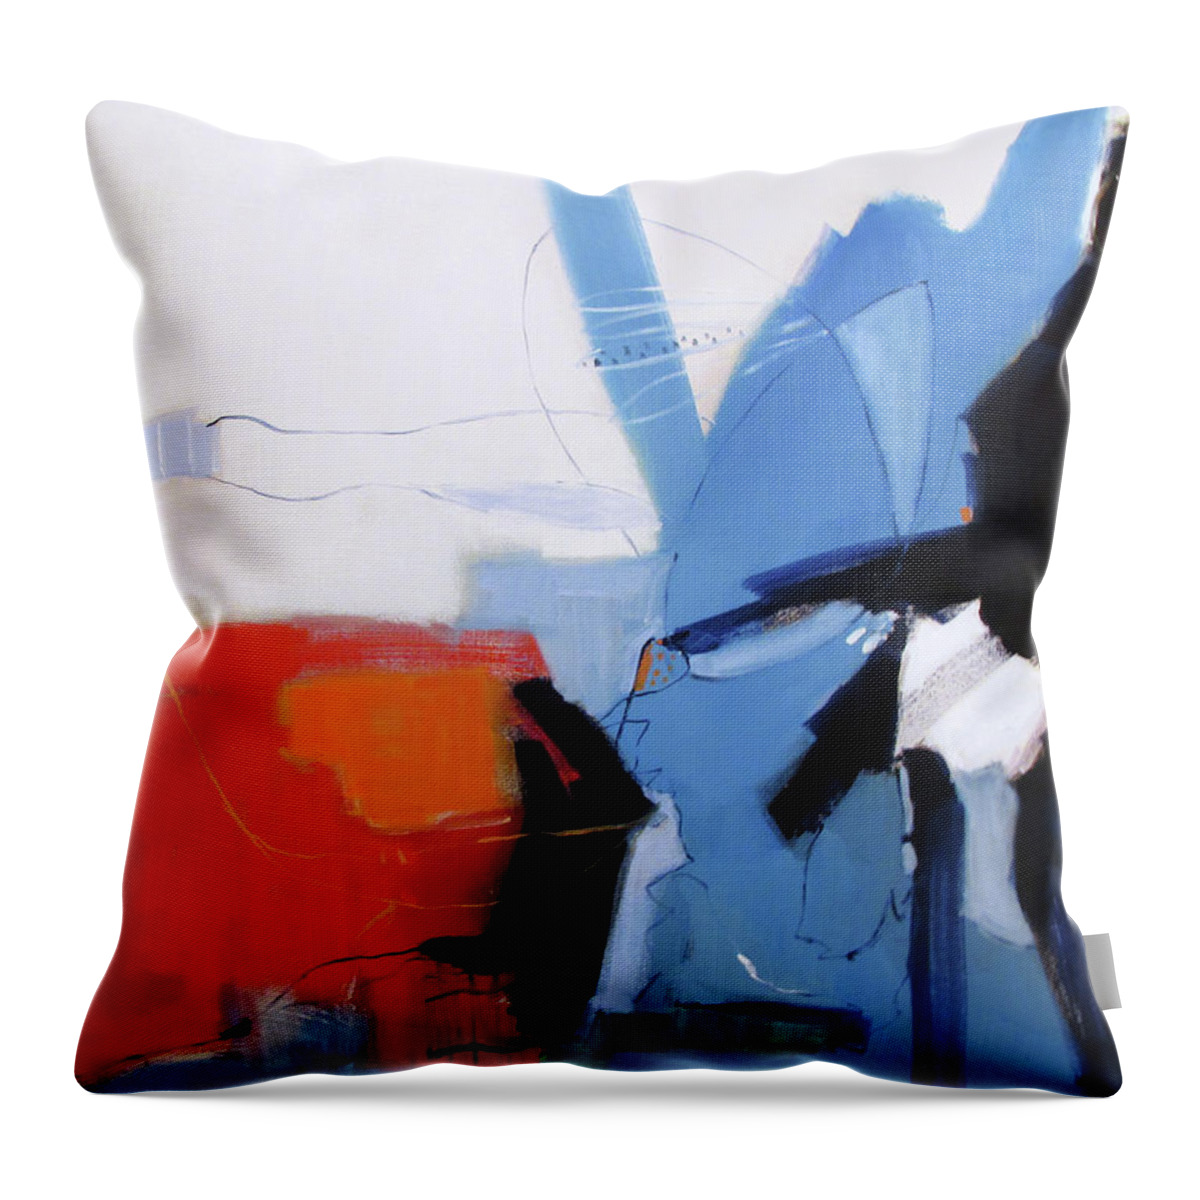 Patriot Throw Pillow featuring the painting Patriot by Chris Gholson